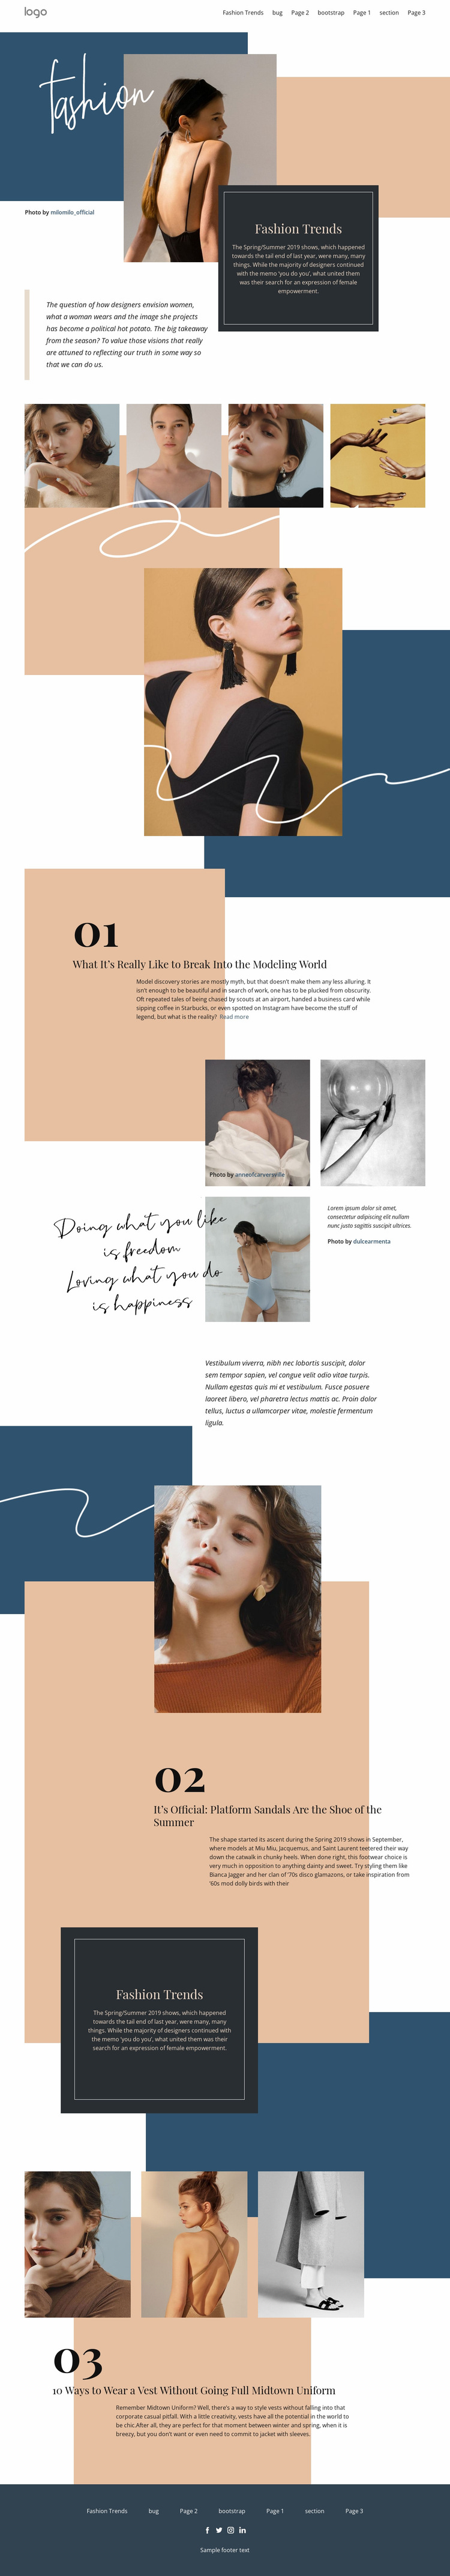 Innovative trends in fashion  Website Builder Templates